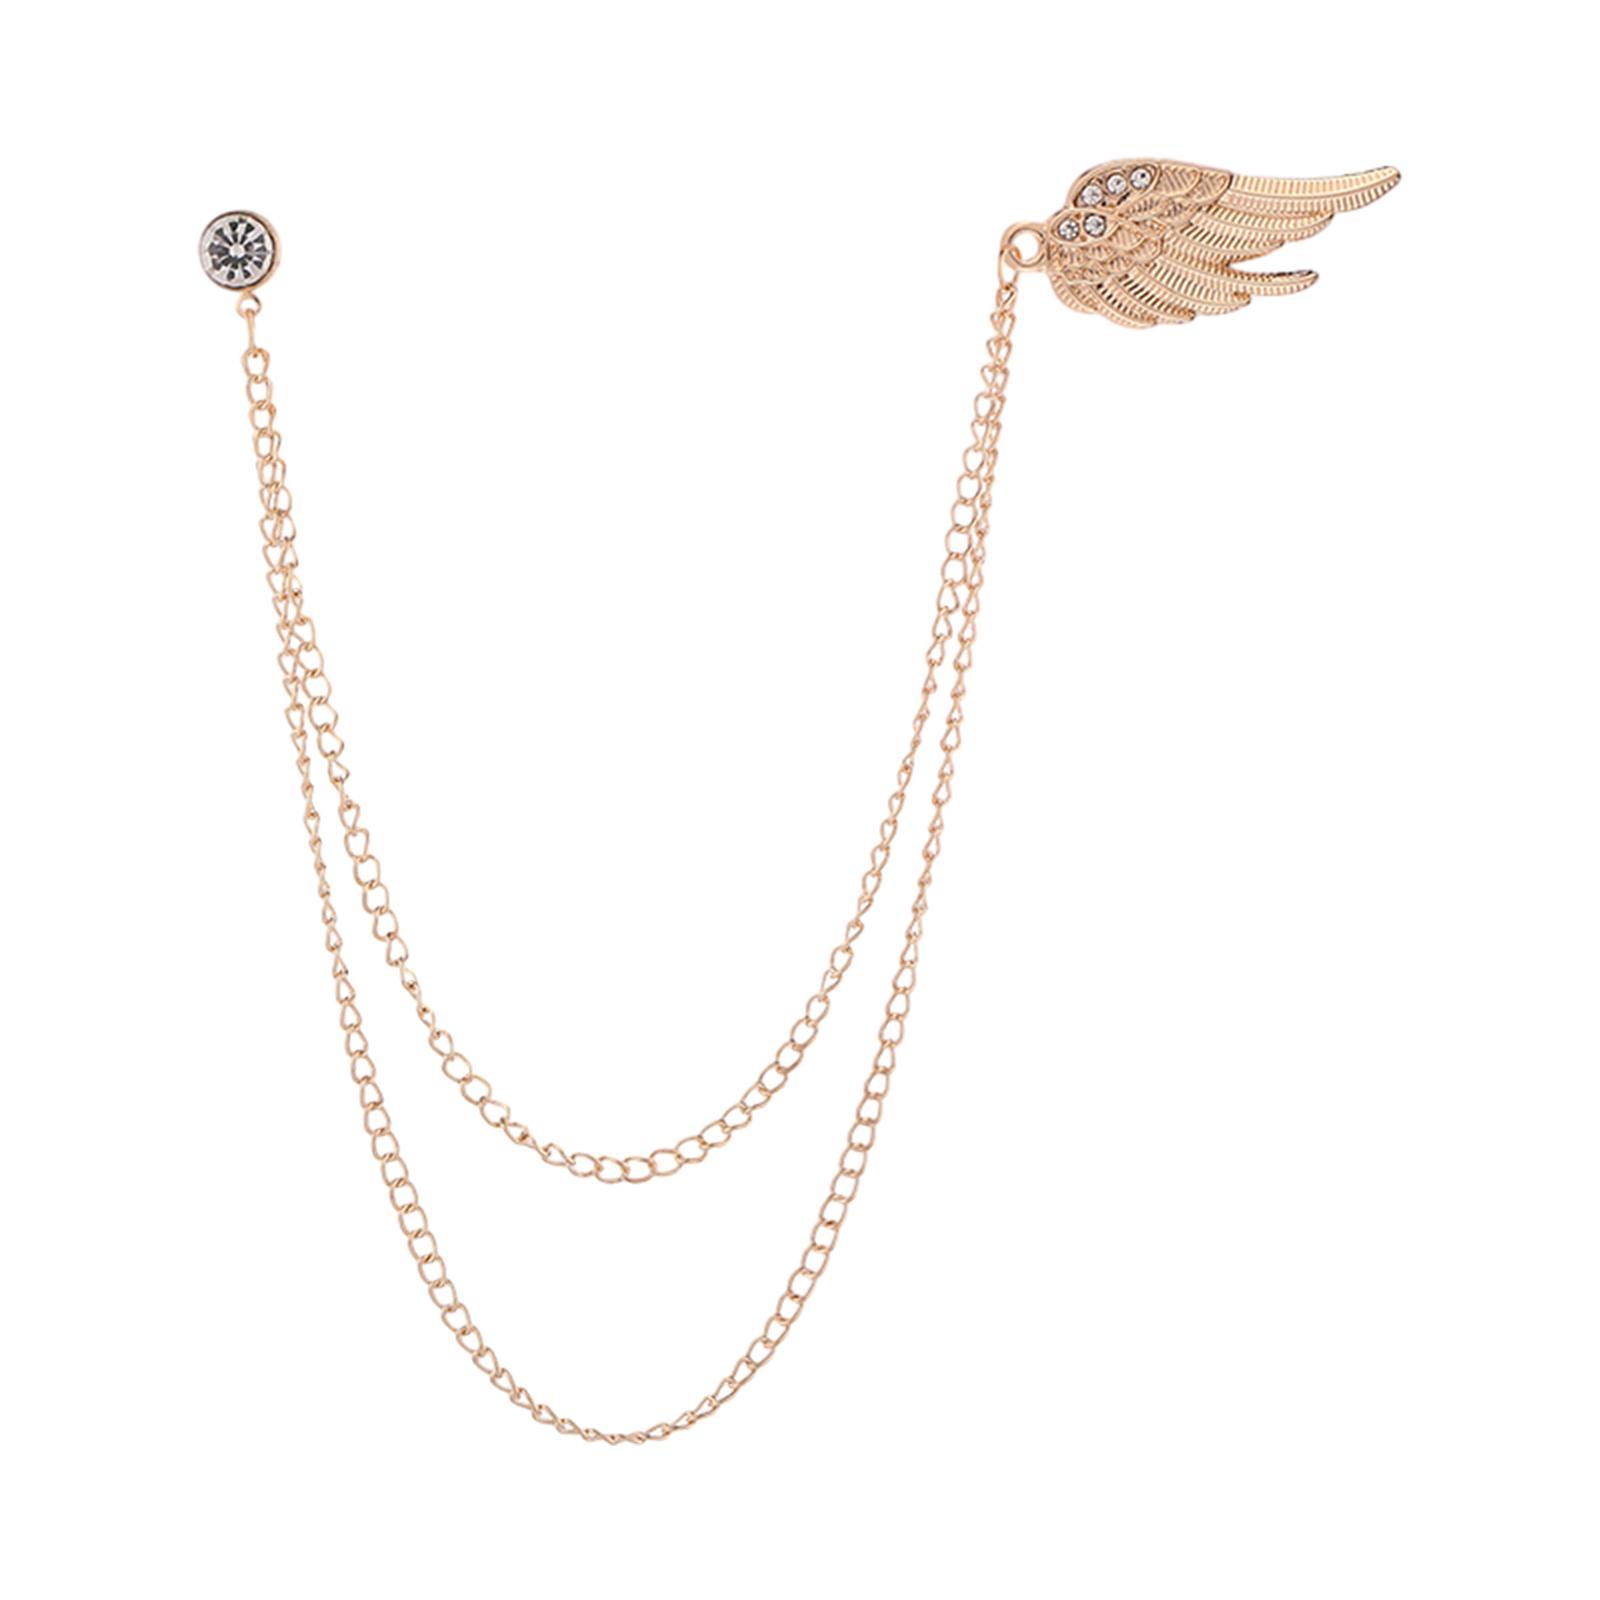 Angel Wing Brooch Pin Hanging Chains Fashion Chain Brooch for Men Suit